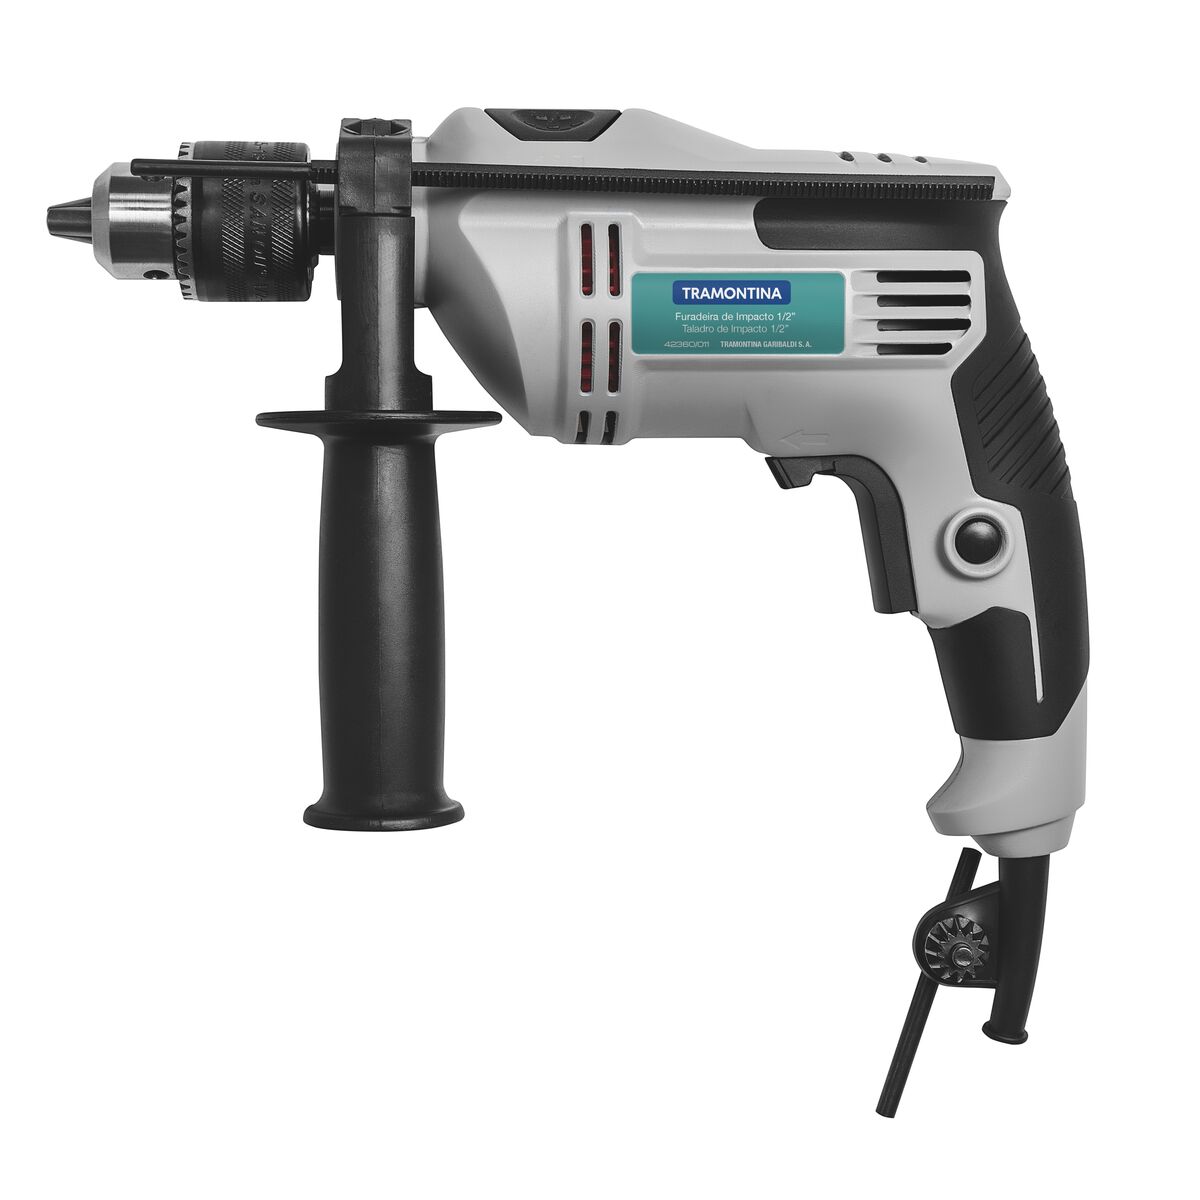 Tramontina MASTER 1/2 impact drill for professional use with